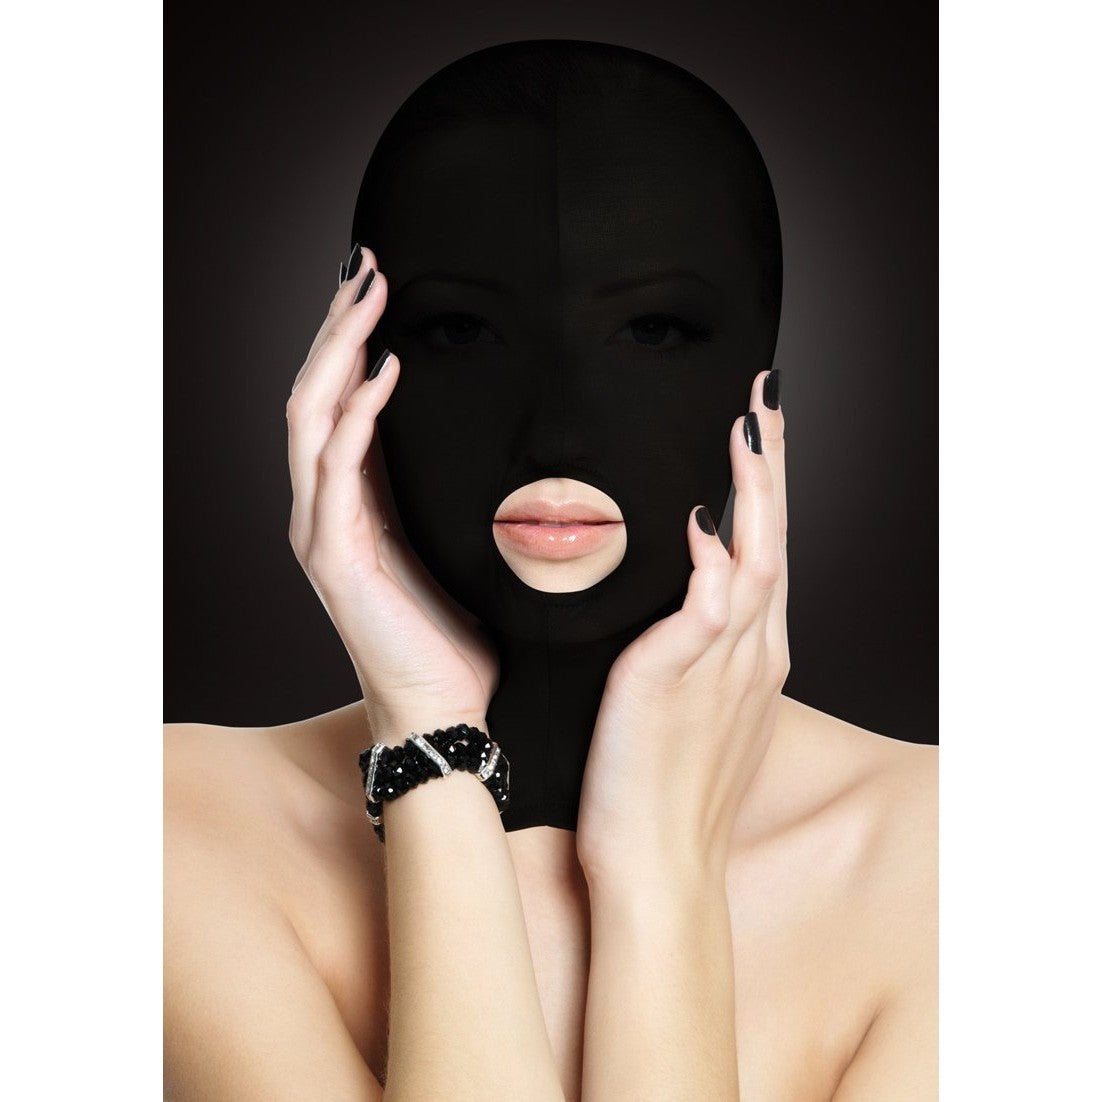 Submission Mask Black Intimates Adult Boutique